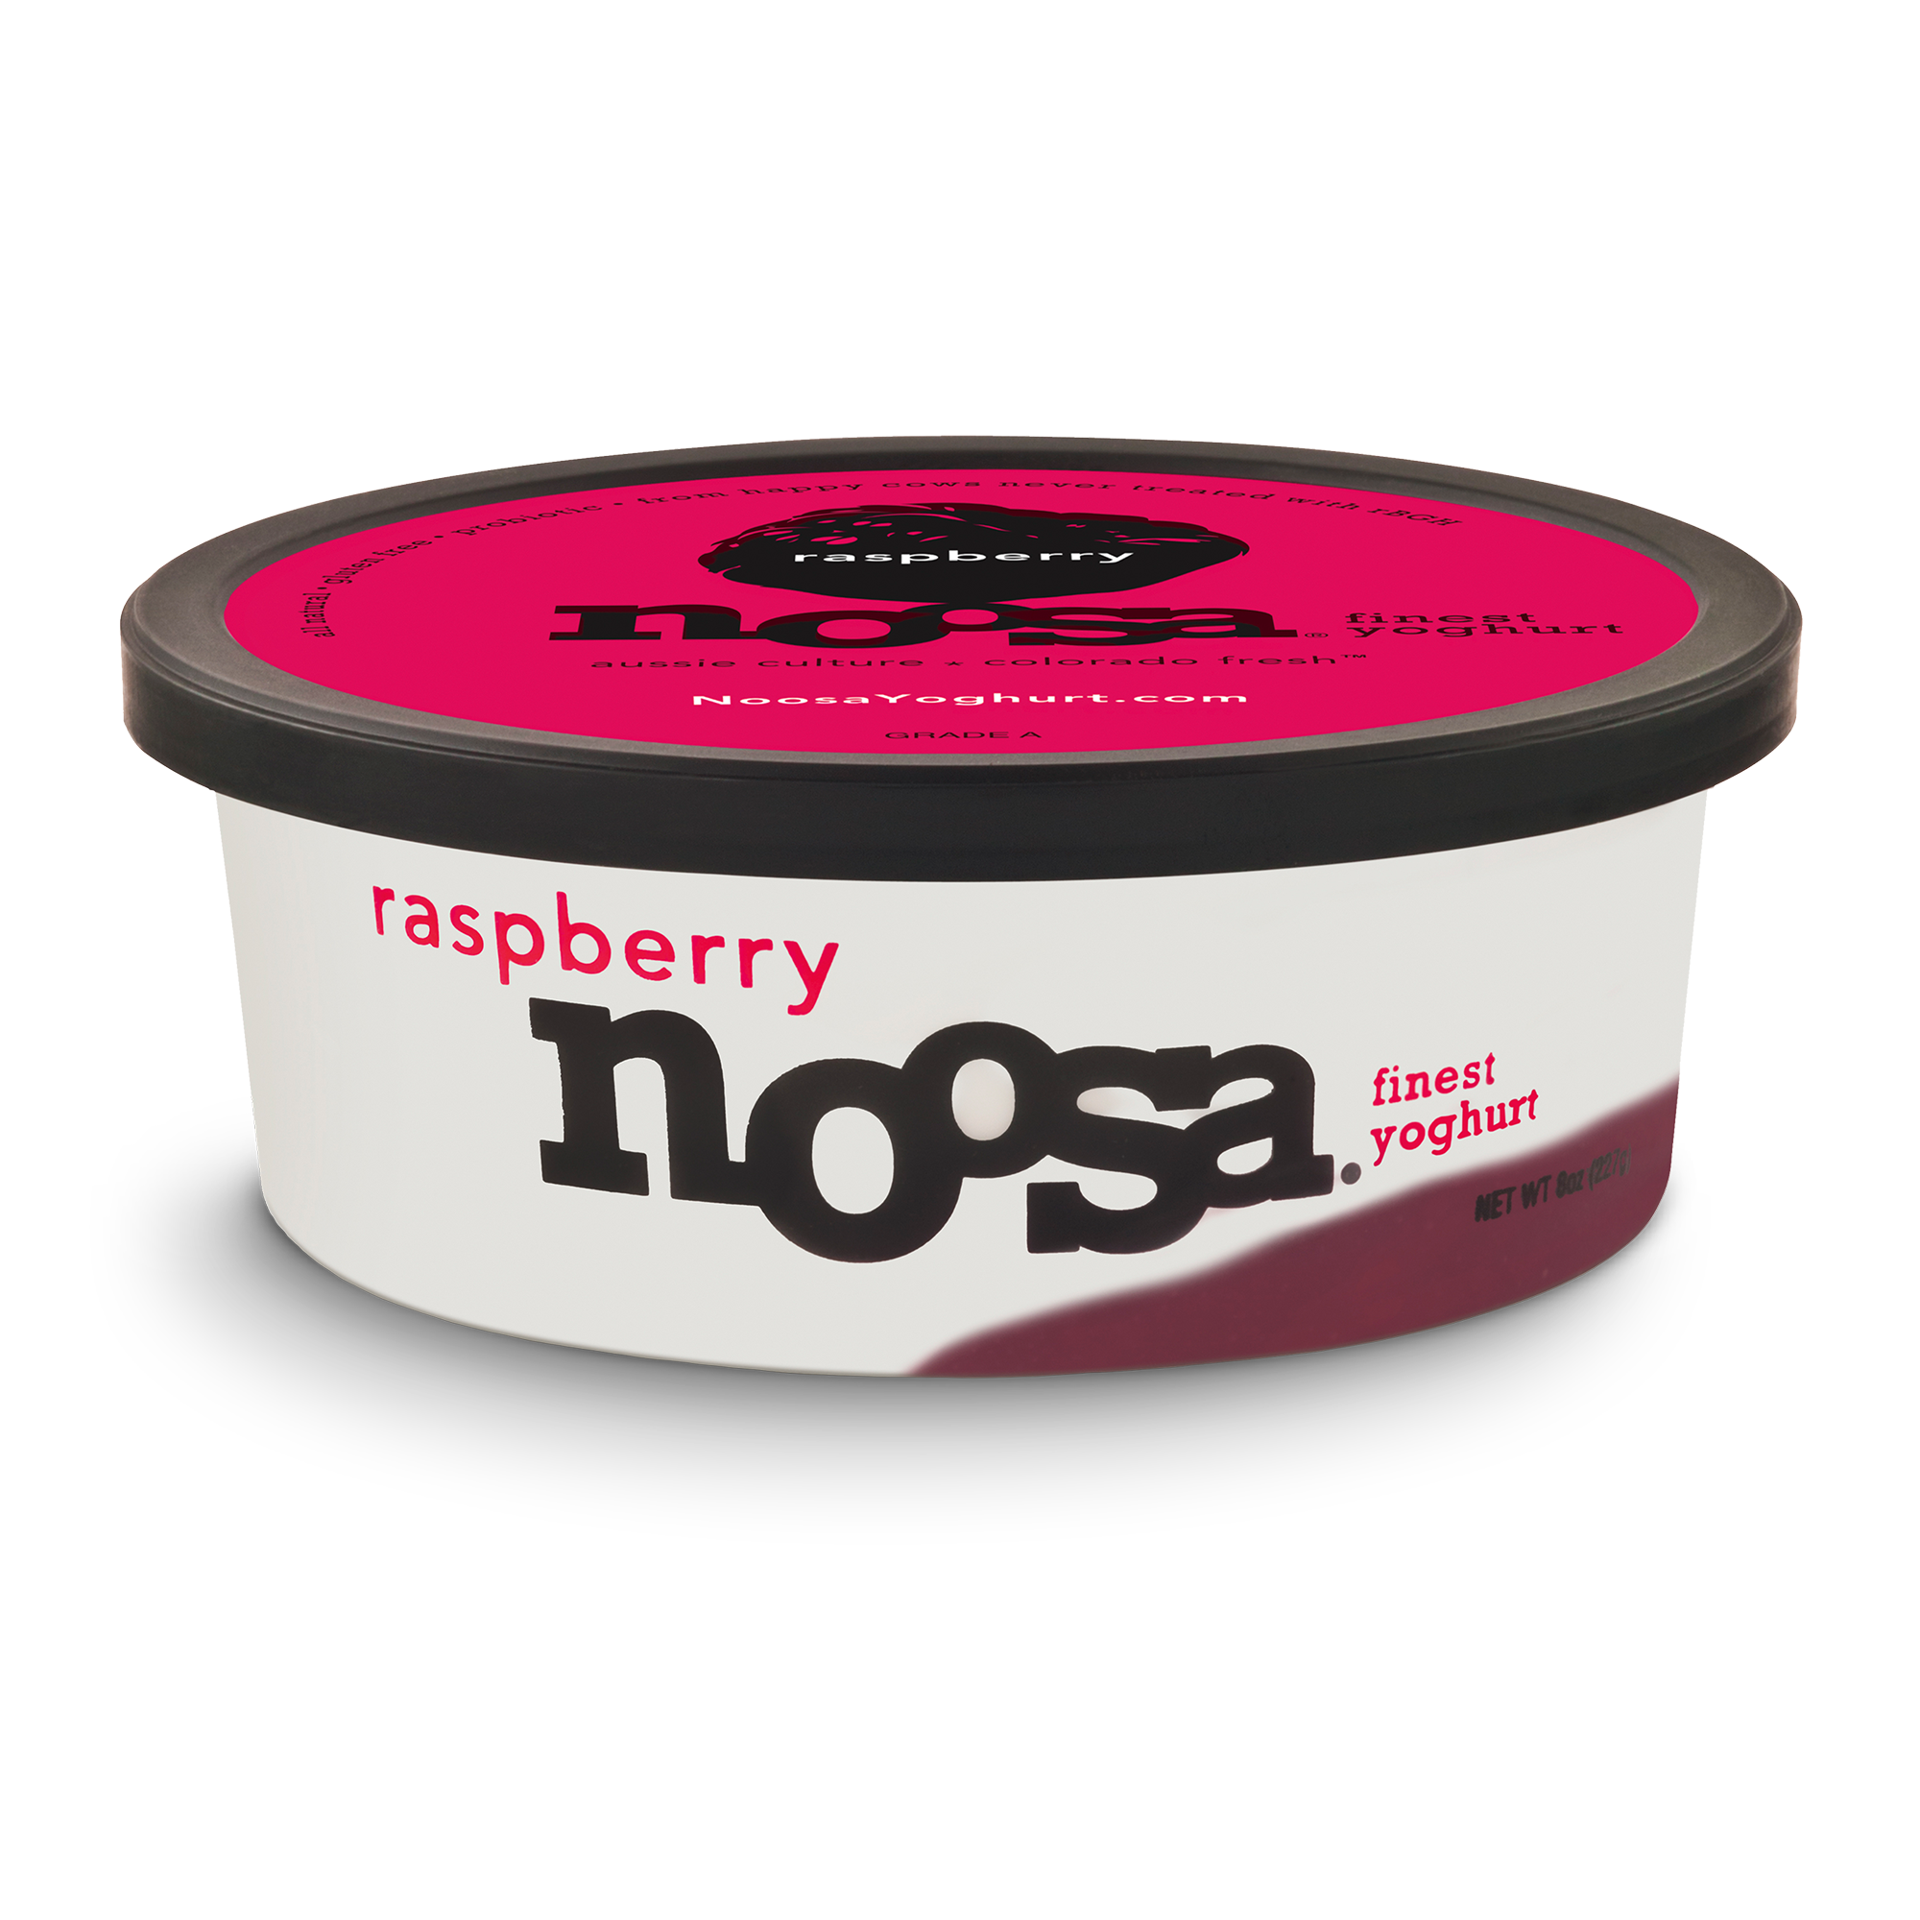 slide 1 of 9, noosa Yoghurt, Raspberry, 8 oz, Whole Milk Yogurt, Grade-A Pasteurized, Gluten Free, Probiotic, Made With the Finest Quality Ingredients, 8 oz